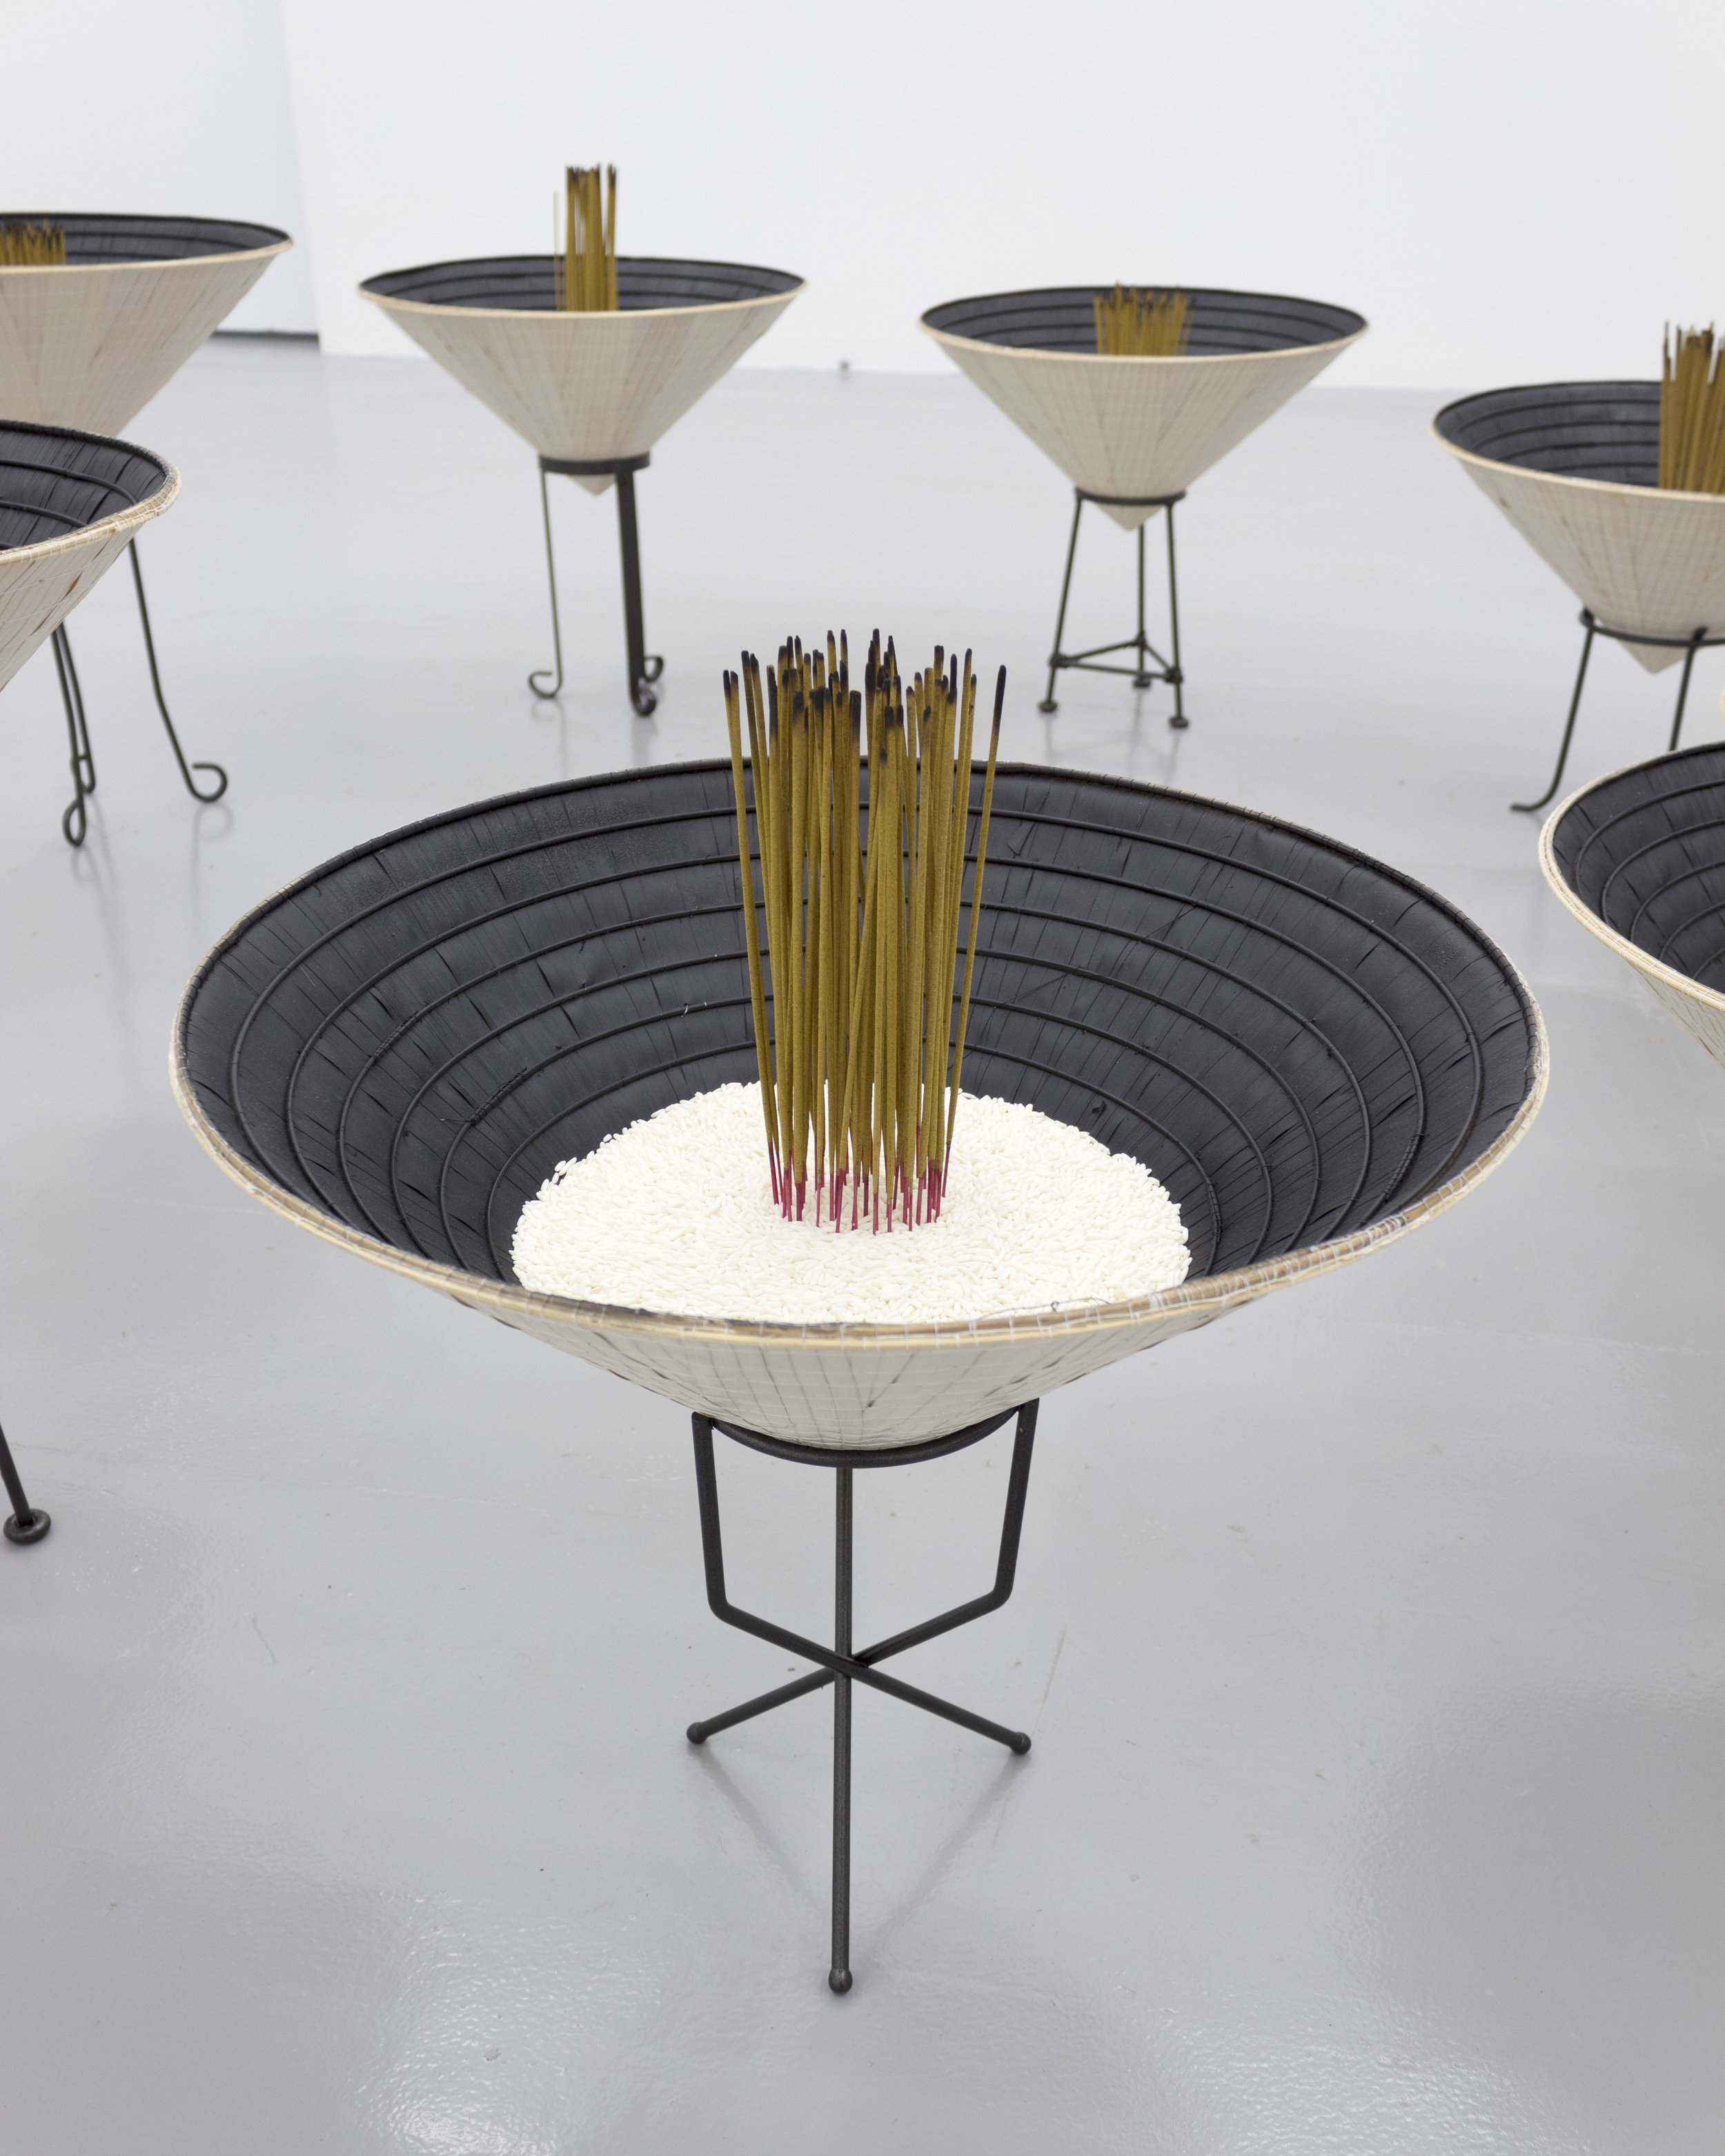  Millian Giang Lien Pham,  Reforge: 9 Phases (Eight),  2019. Conical hat, sweet rice, incense, metal stand 